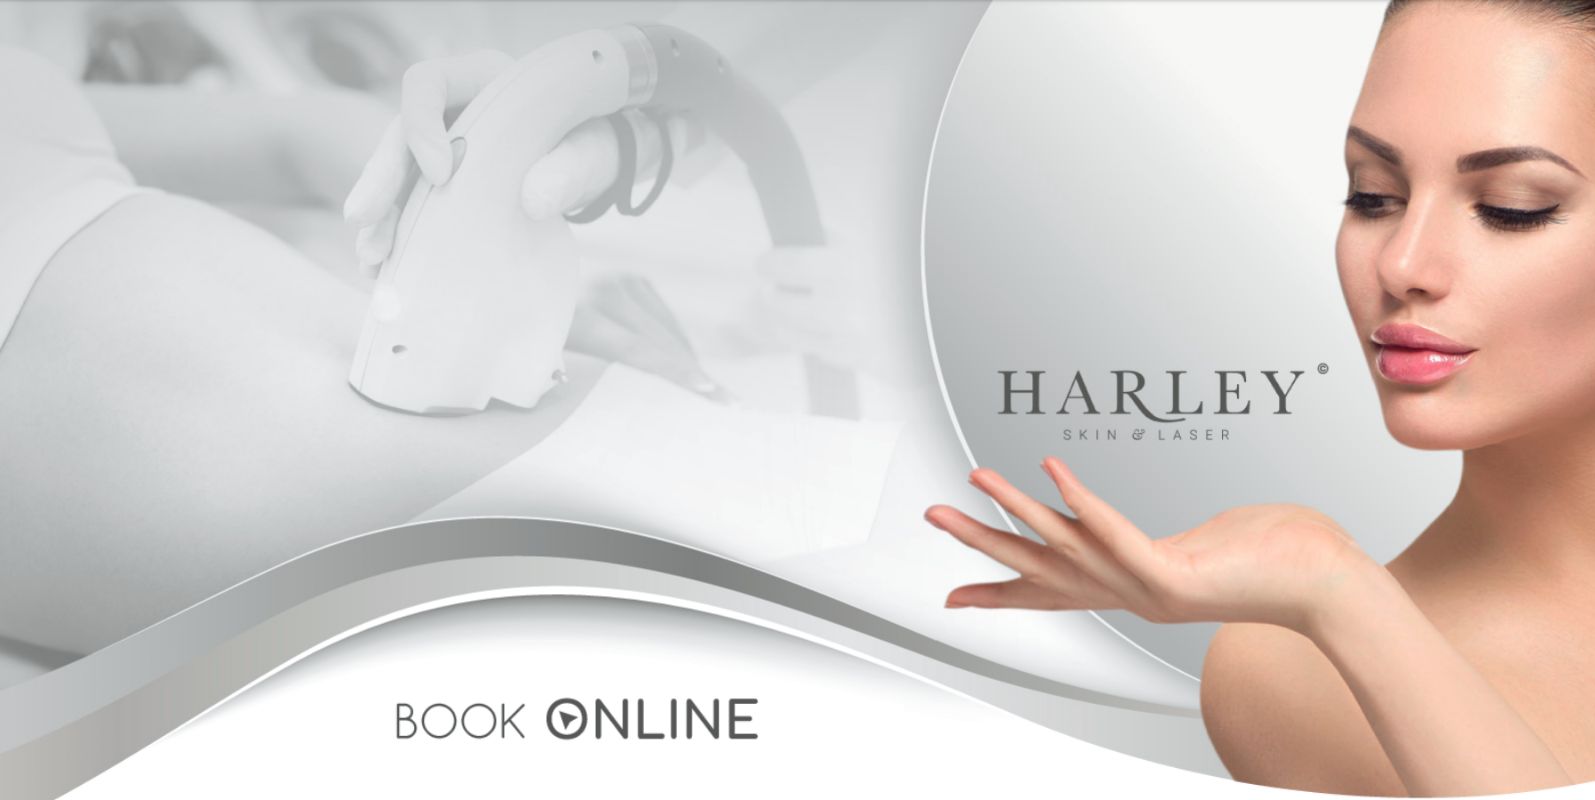 Harley Skin and Laser Clinic Banner